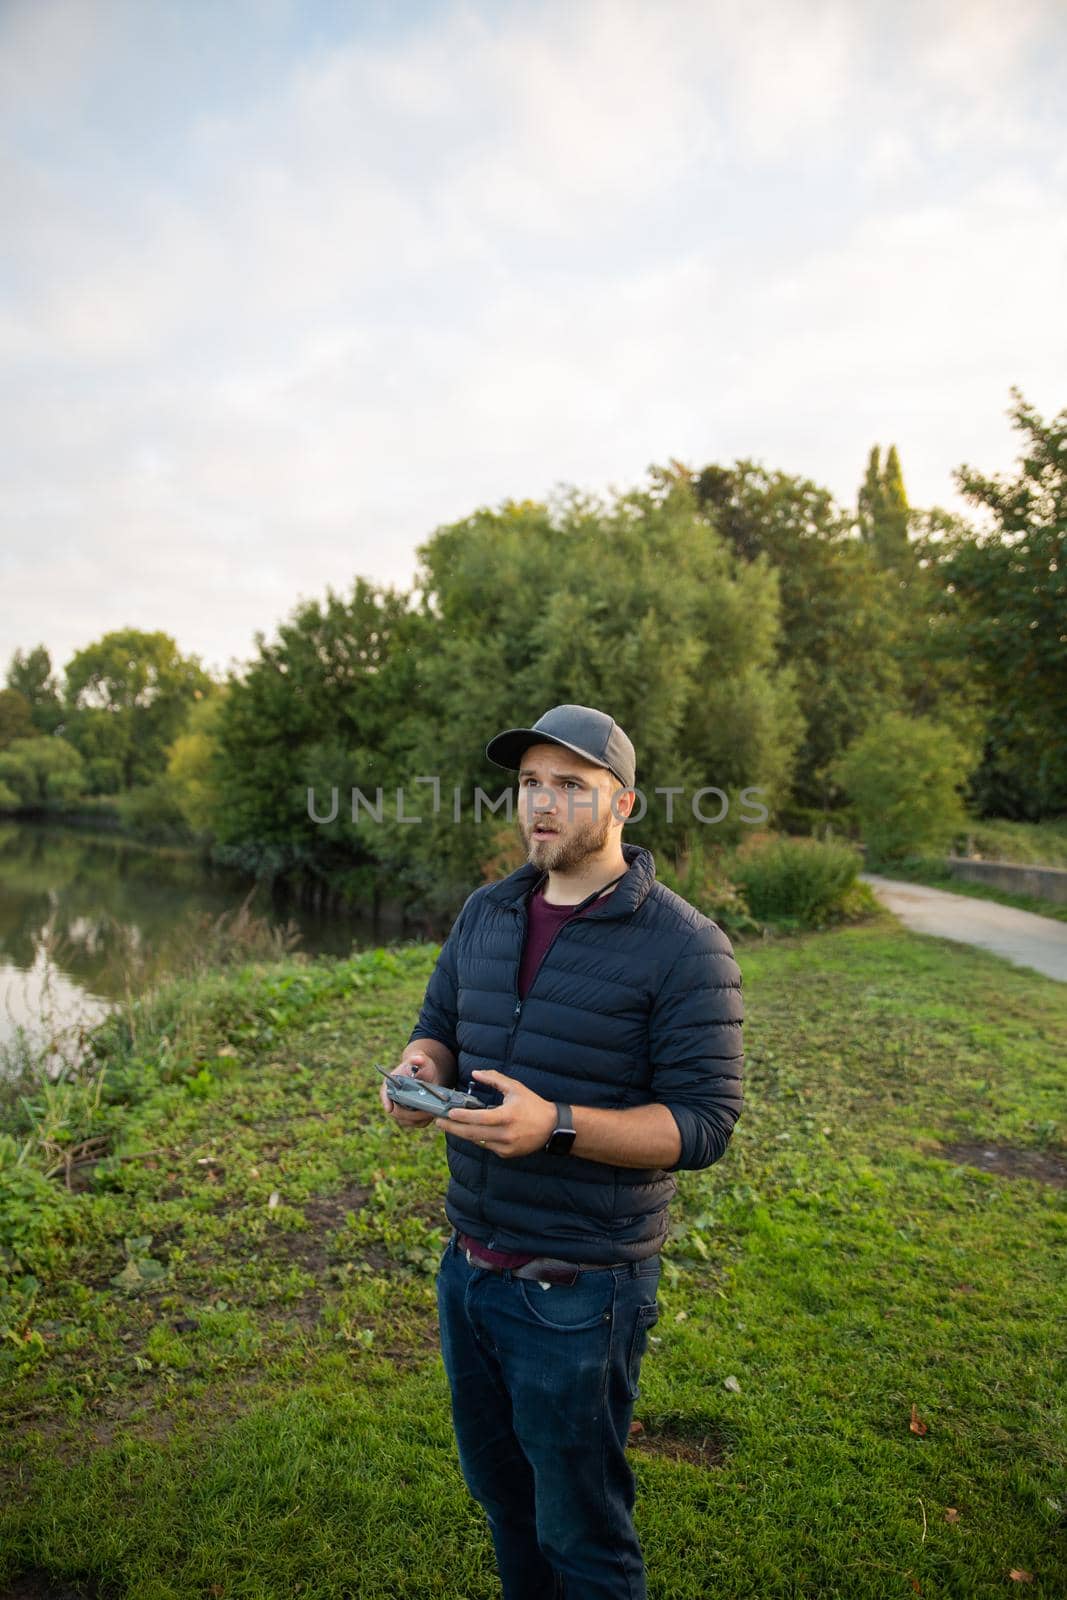 Concentrated man standing next to lake and holding remote control. Man in park with trees and boats on lake as background. People interacting with technology outside